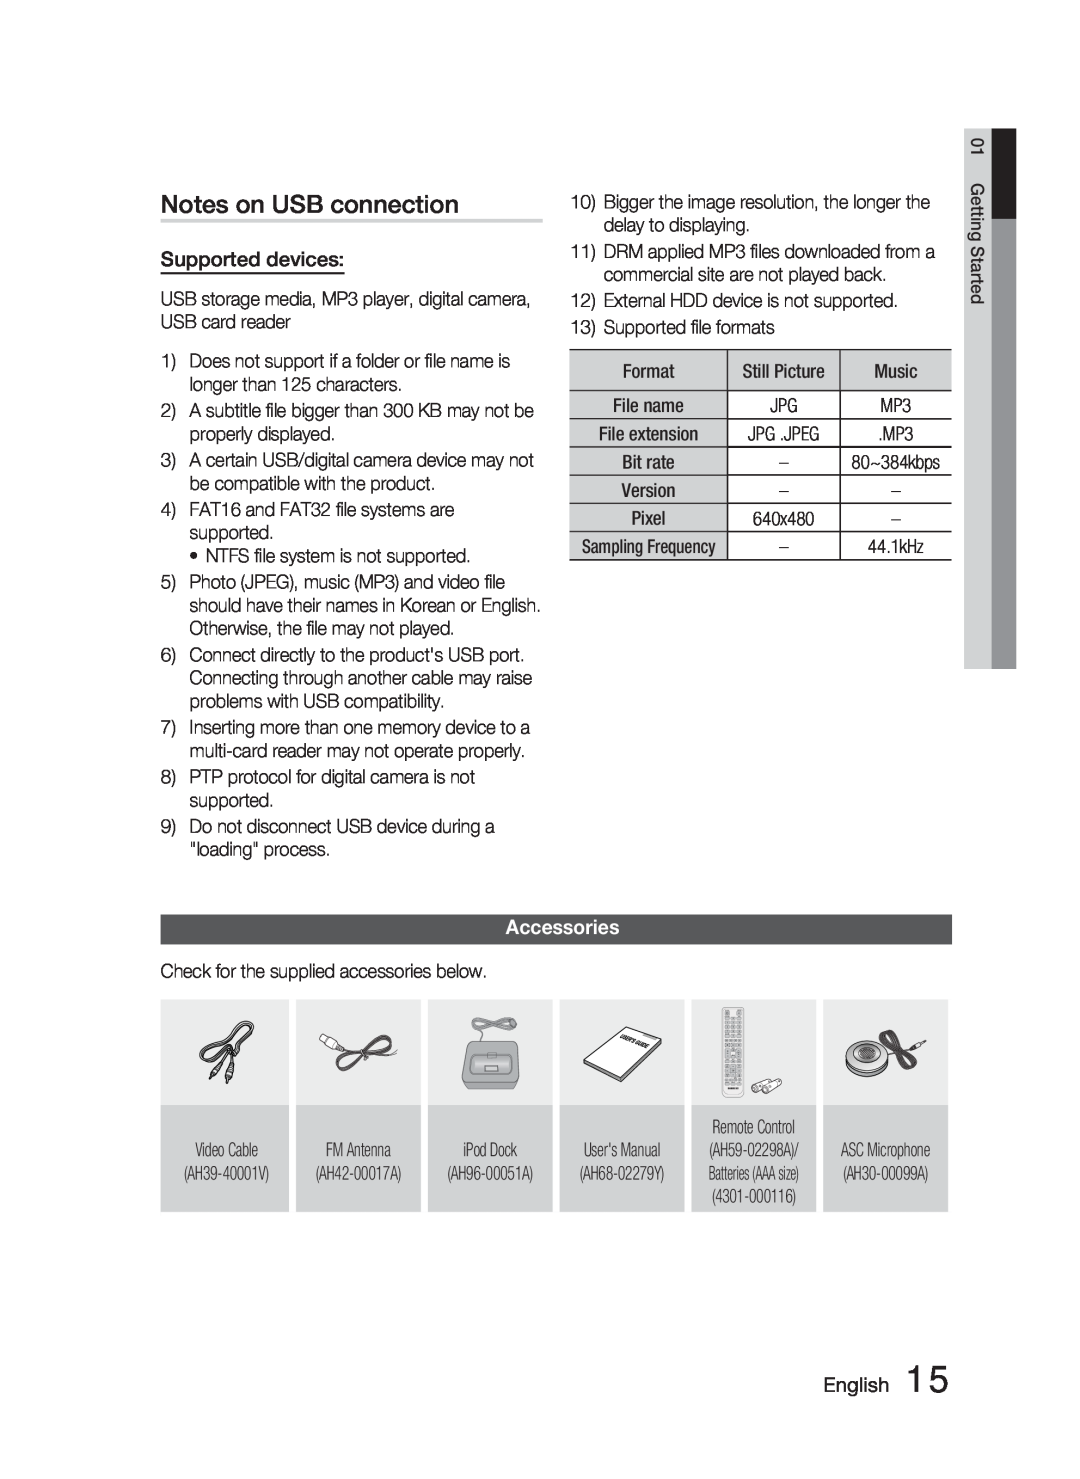 Samsung AH68-02279Y user manual Notes on USB connection, Supported devices, Accessories, English 